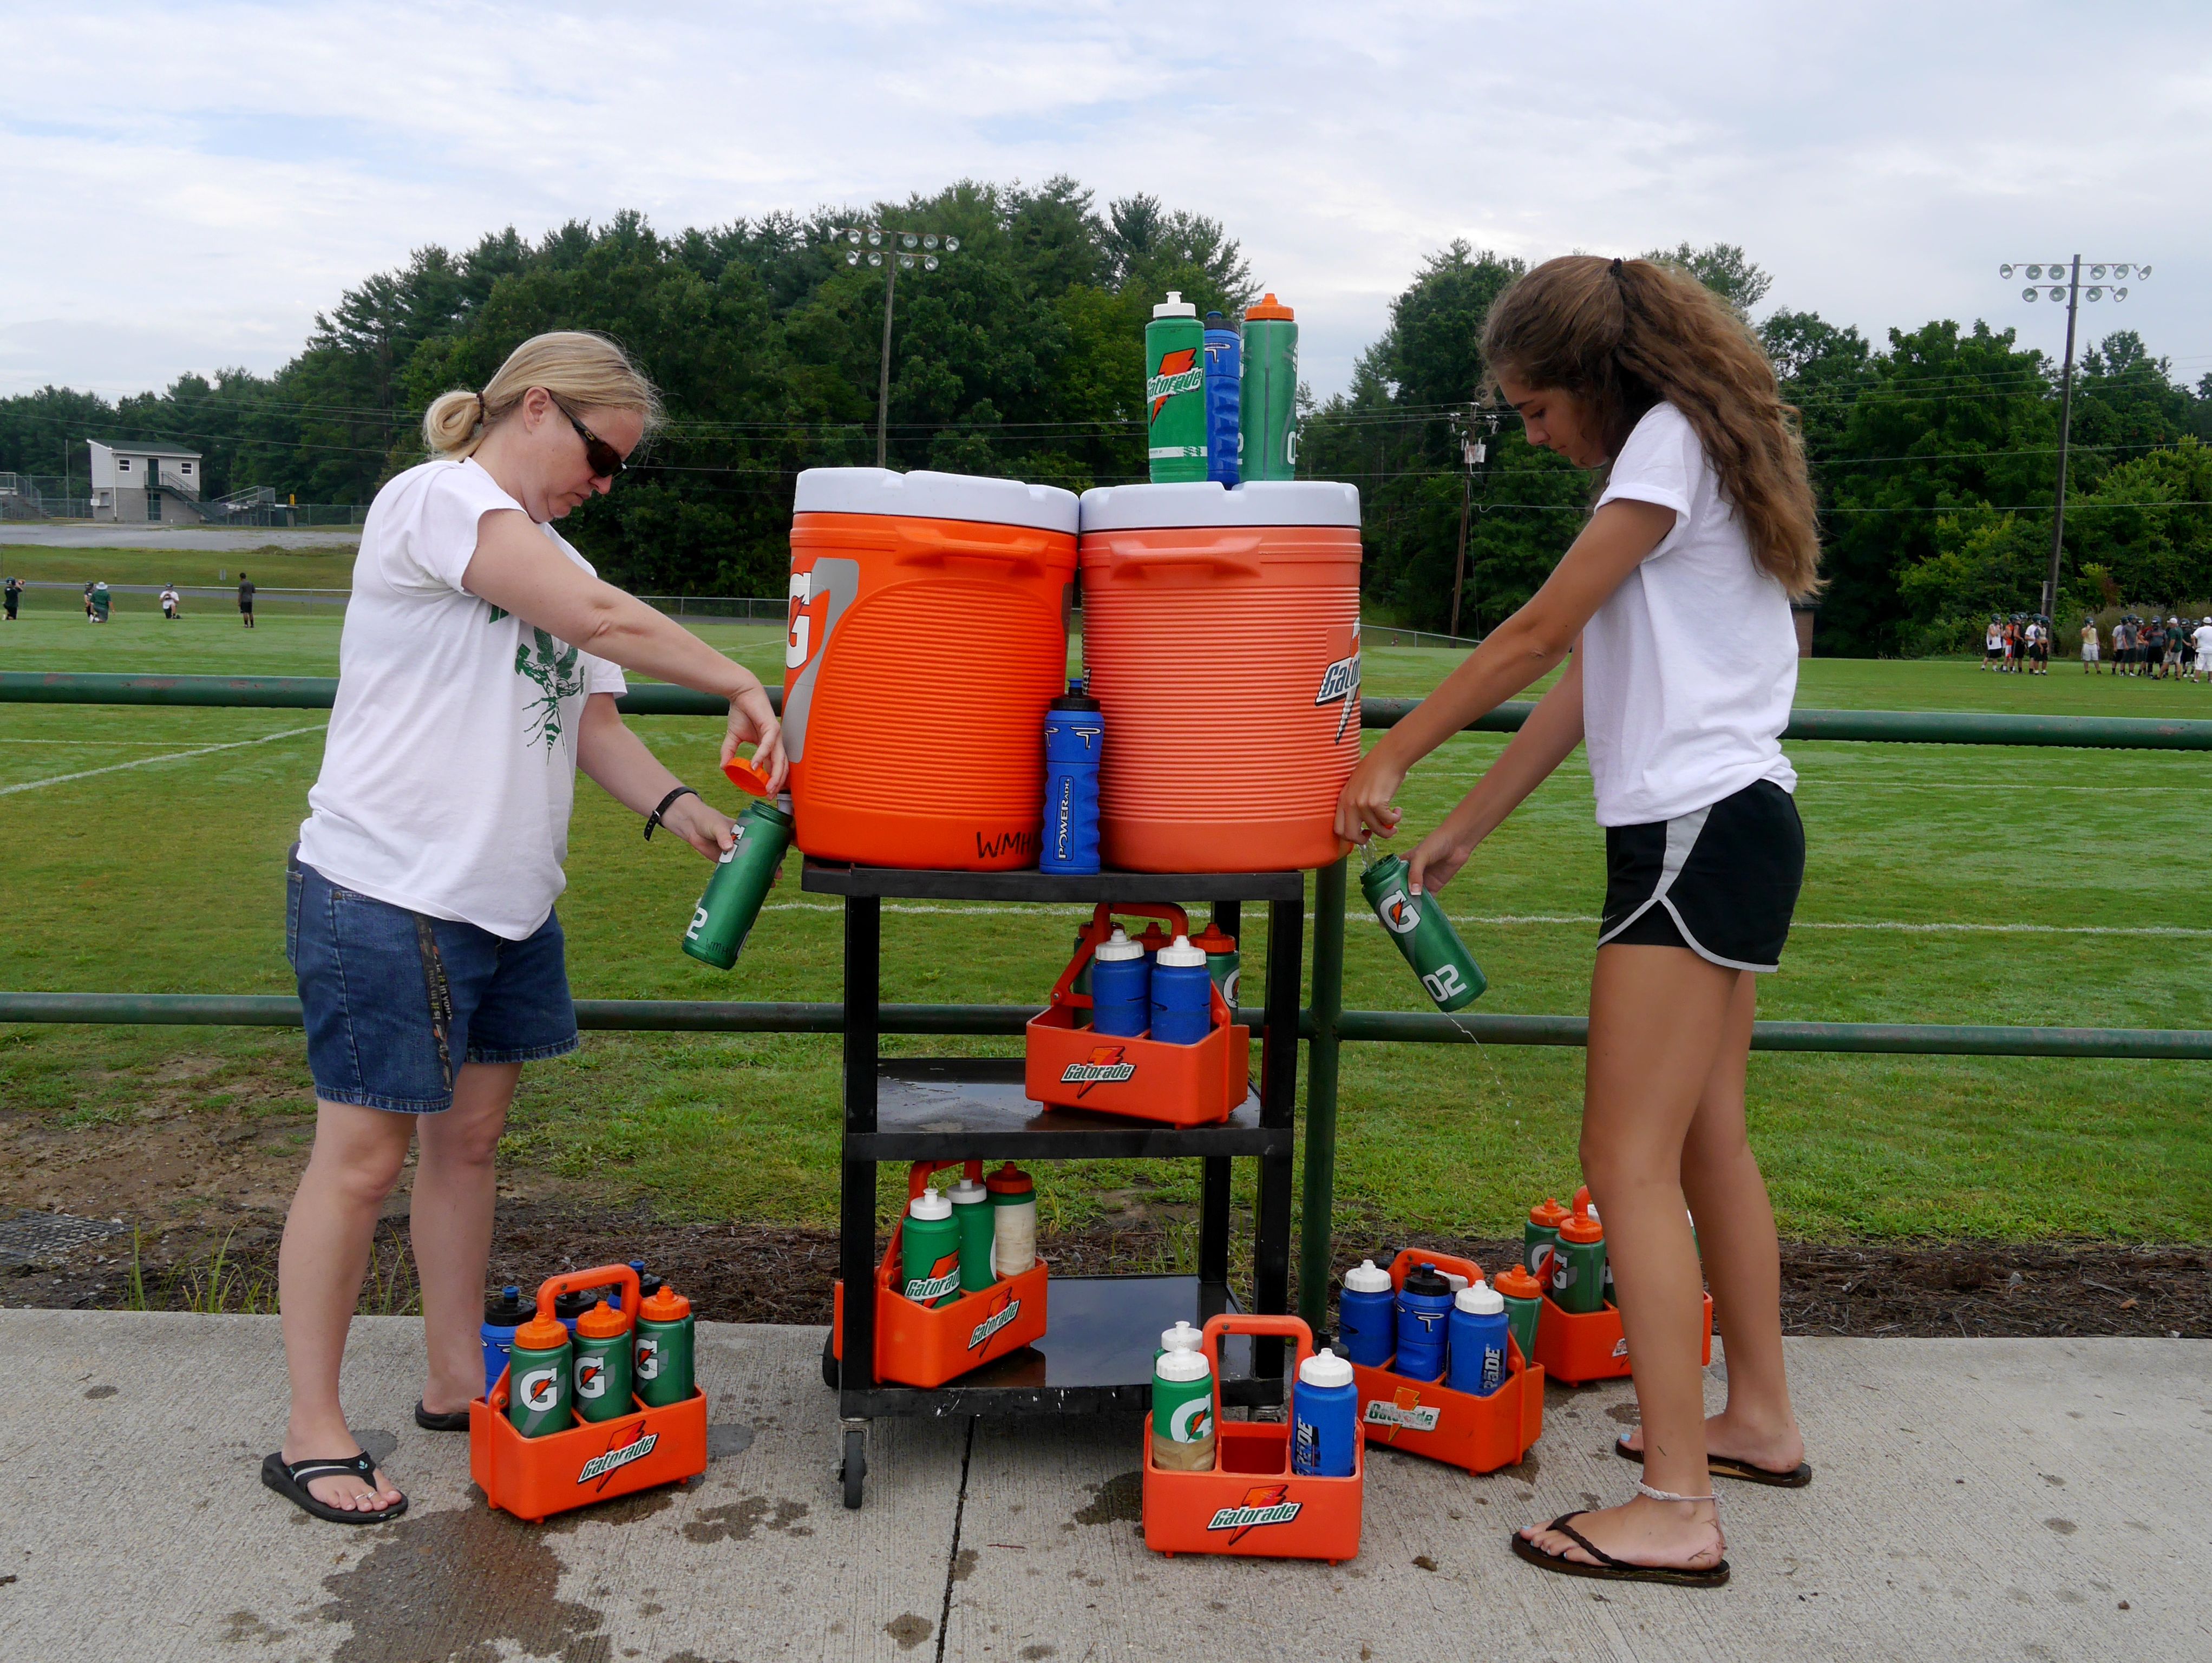 Wilson Memorial High School's athletic trainer Susanna Larner and senior Kylie Ritts refill bottles with water during the first day of football practice on Thursday, July 28, 2016.